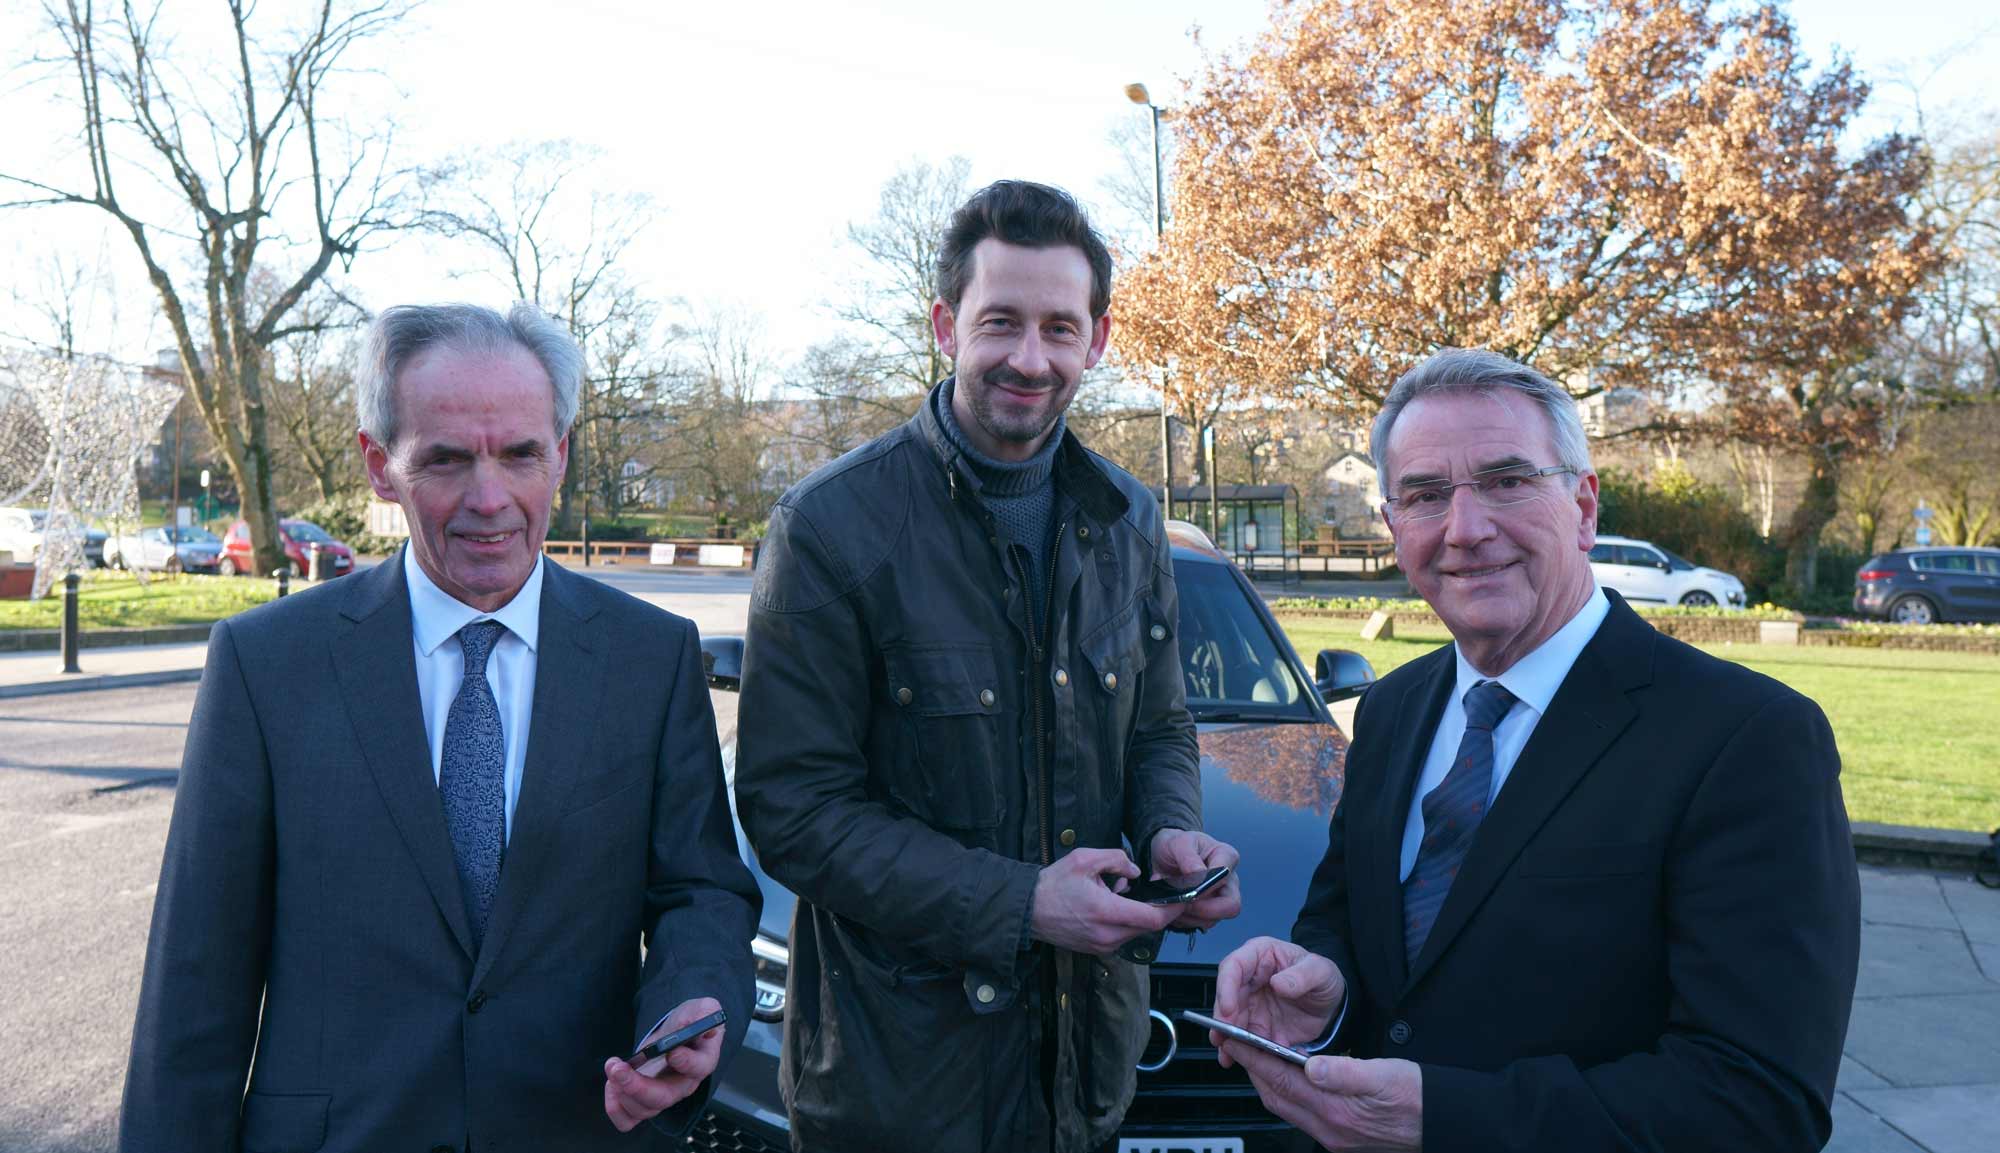 CEO and founder of AppyParking Dan Hubert, North Yorkshire County’s executive member for access Councillor Don Mackenzie, Harrogate Borough Council’s cabinet member for sustainable transport Councillor Phil Ireland